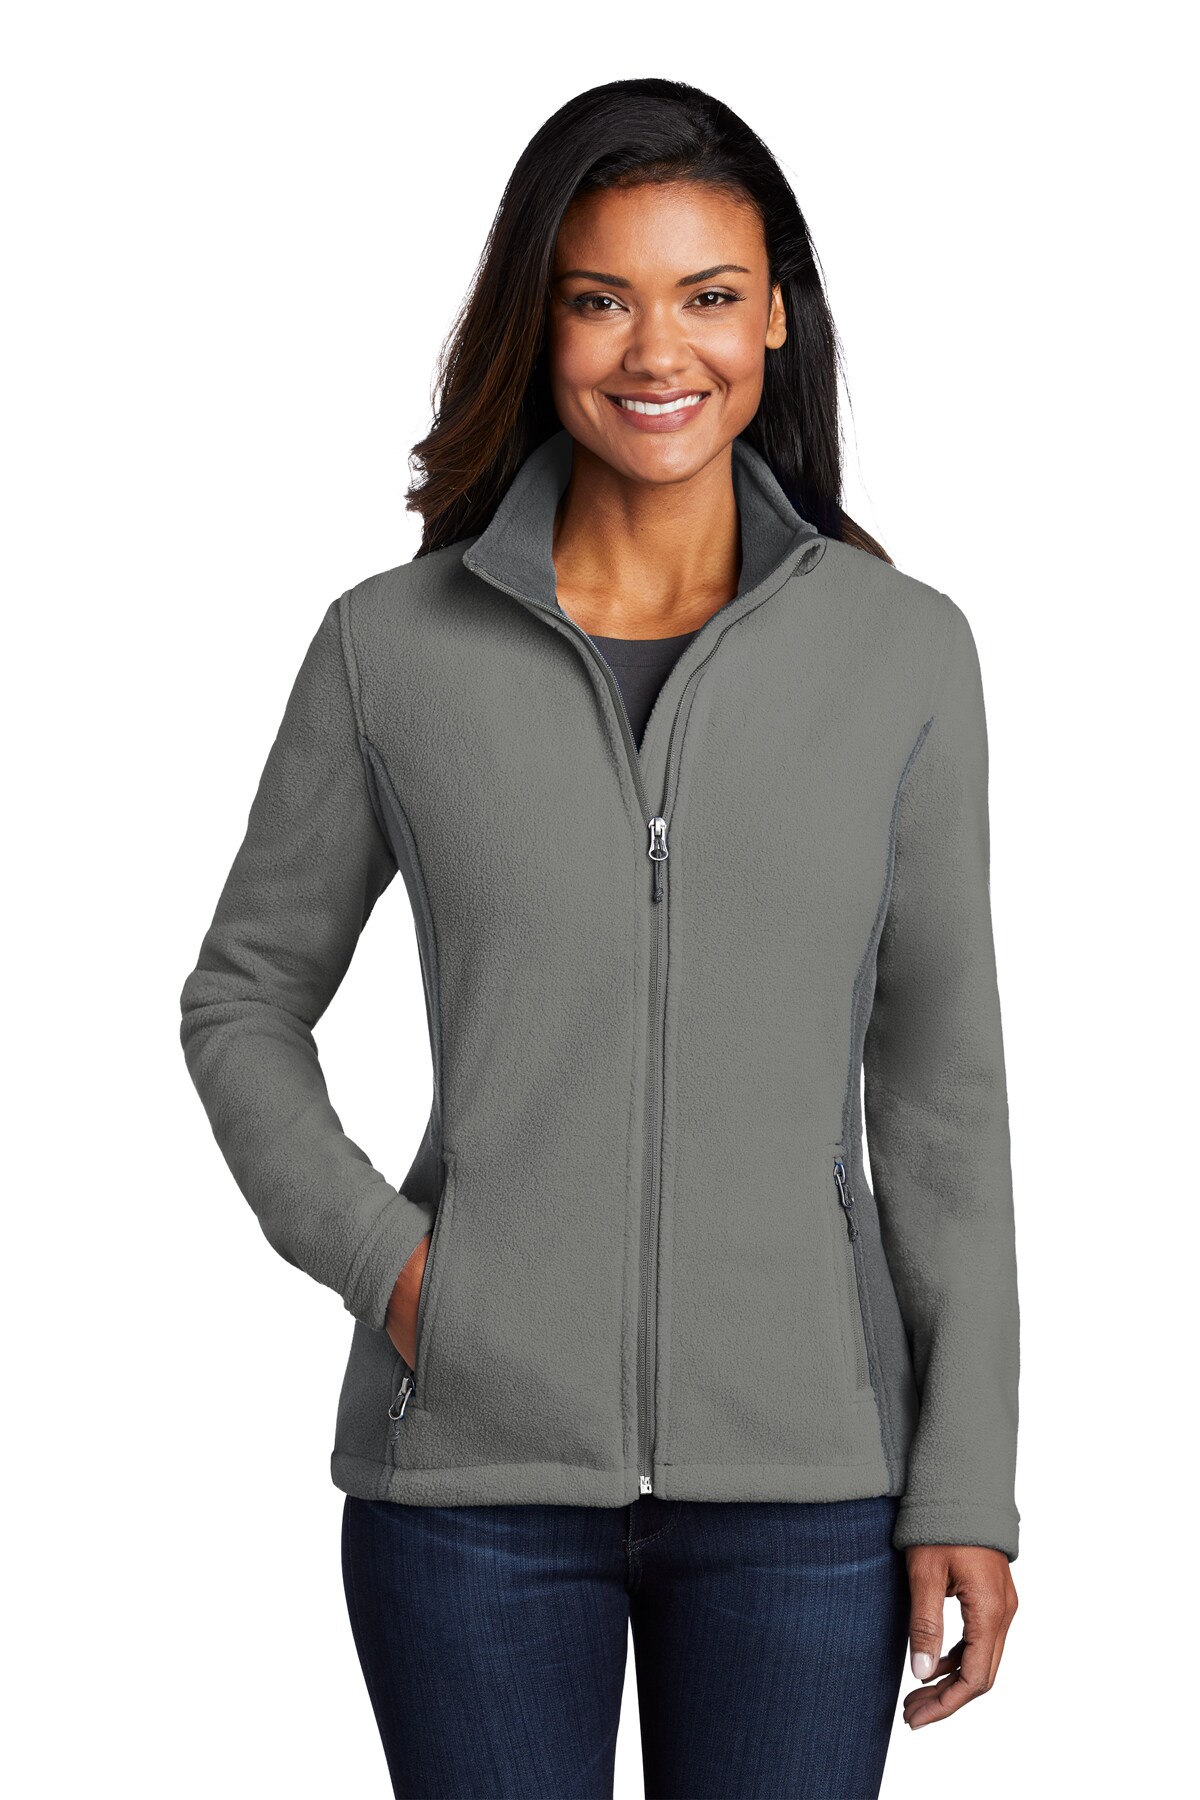 Ladies Colorblock Value Fleece Jacket - Popular Quality Apparel with Soft,  Lightweight, and Warm Synthetic Fabric Women's Jacket | RADYAN